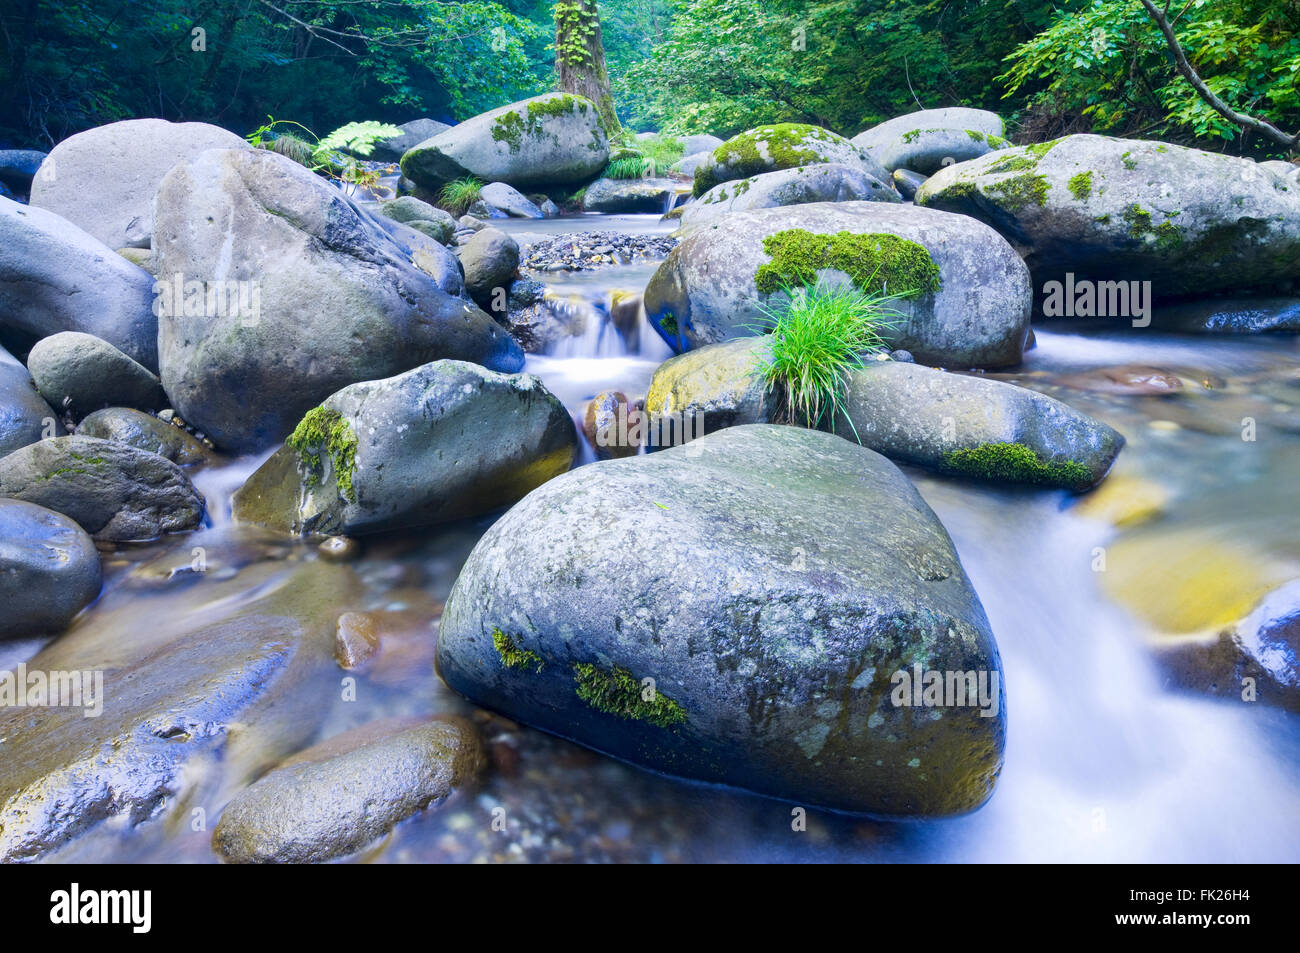 Detail landscape image of rocks and boulders in a mountain stream in Northern Akita, Japan. Stock Photo